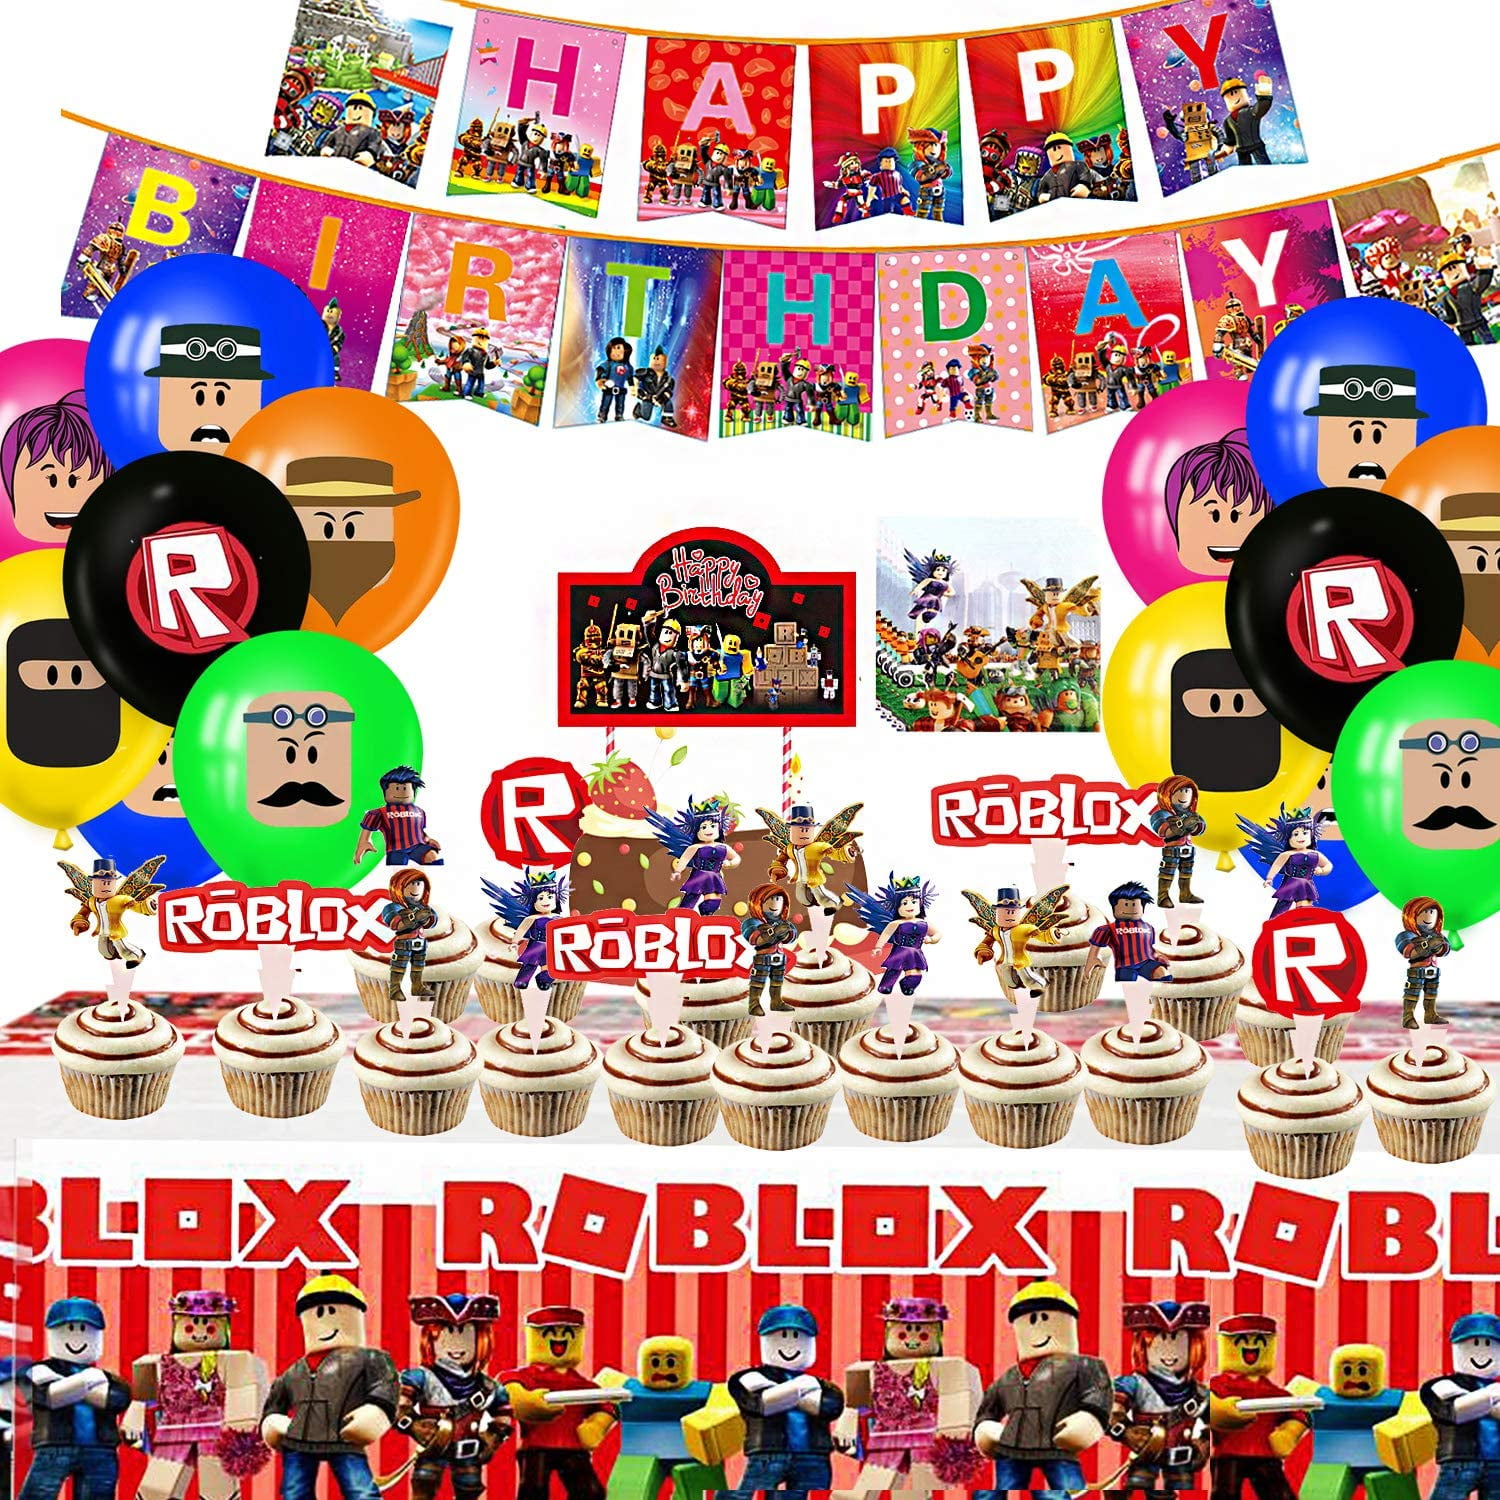 Robot Blocks Party Supplies For Kids Birthday Ro Blox Decorations Included Banners Cake Topper Cupcake Toppers Tablecover Napkins And Balloons For Kids Party Supplies Robot Blocks Birthday Party Walmart Com Walmart Com - roblox balloons party city